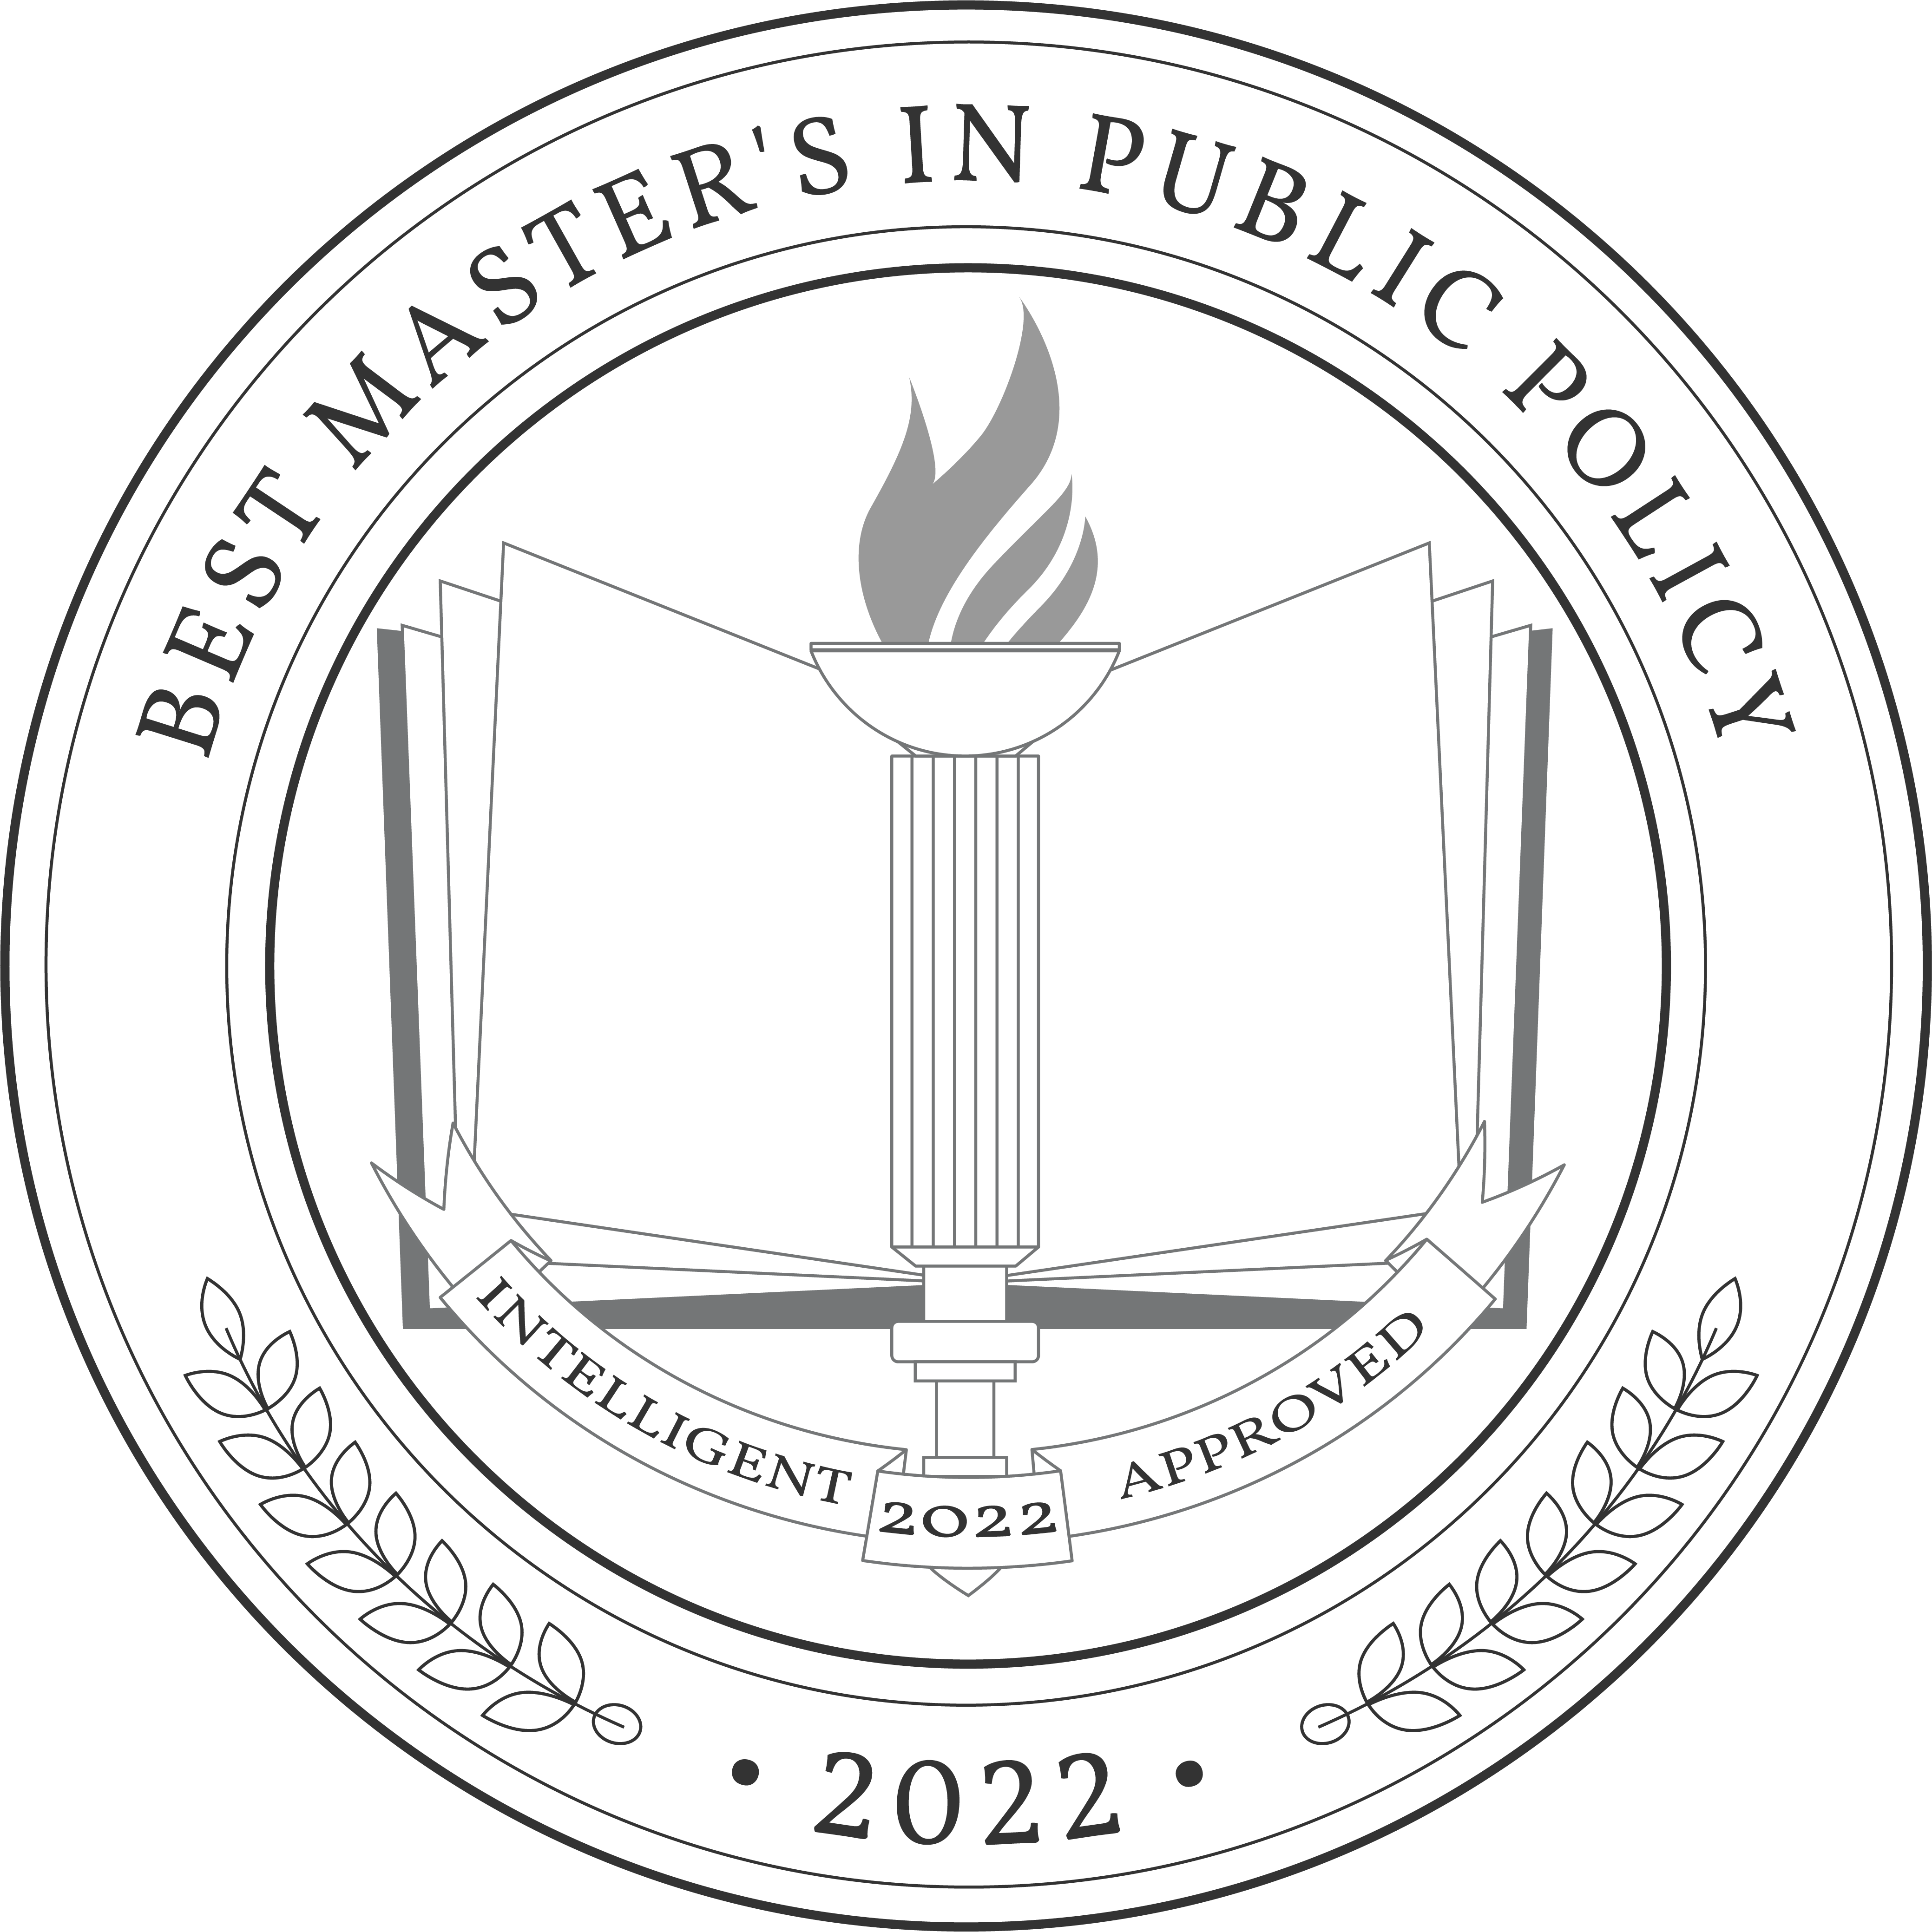 Best Online Master's in Public Policy Degree Programs